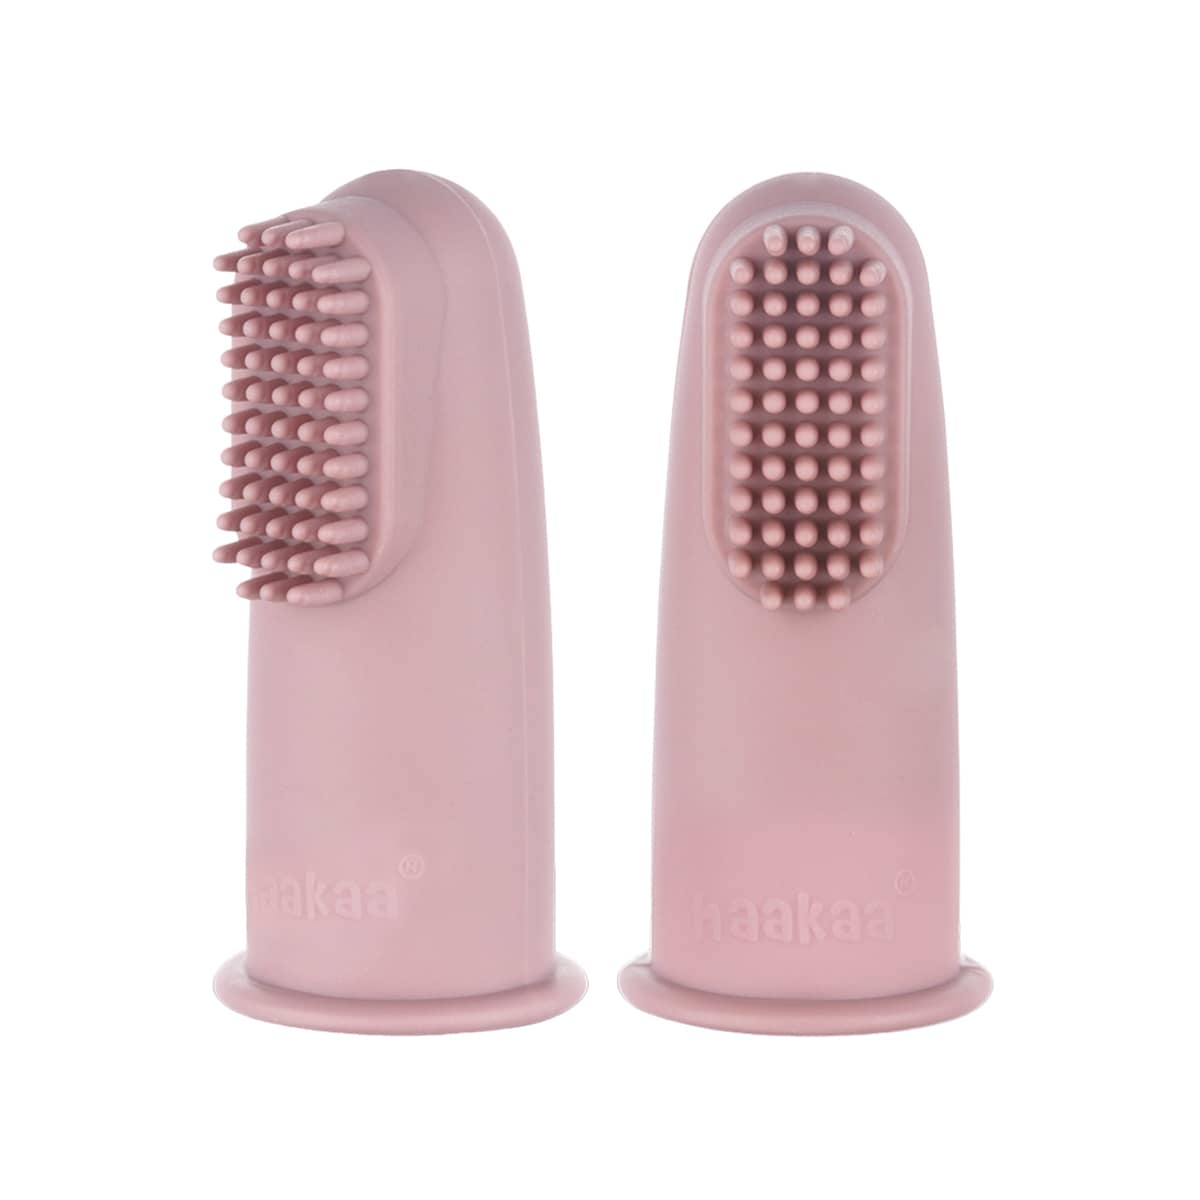 Haakaa Silicone Finger Toothbrushes - Blush